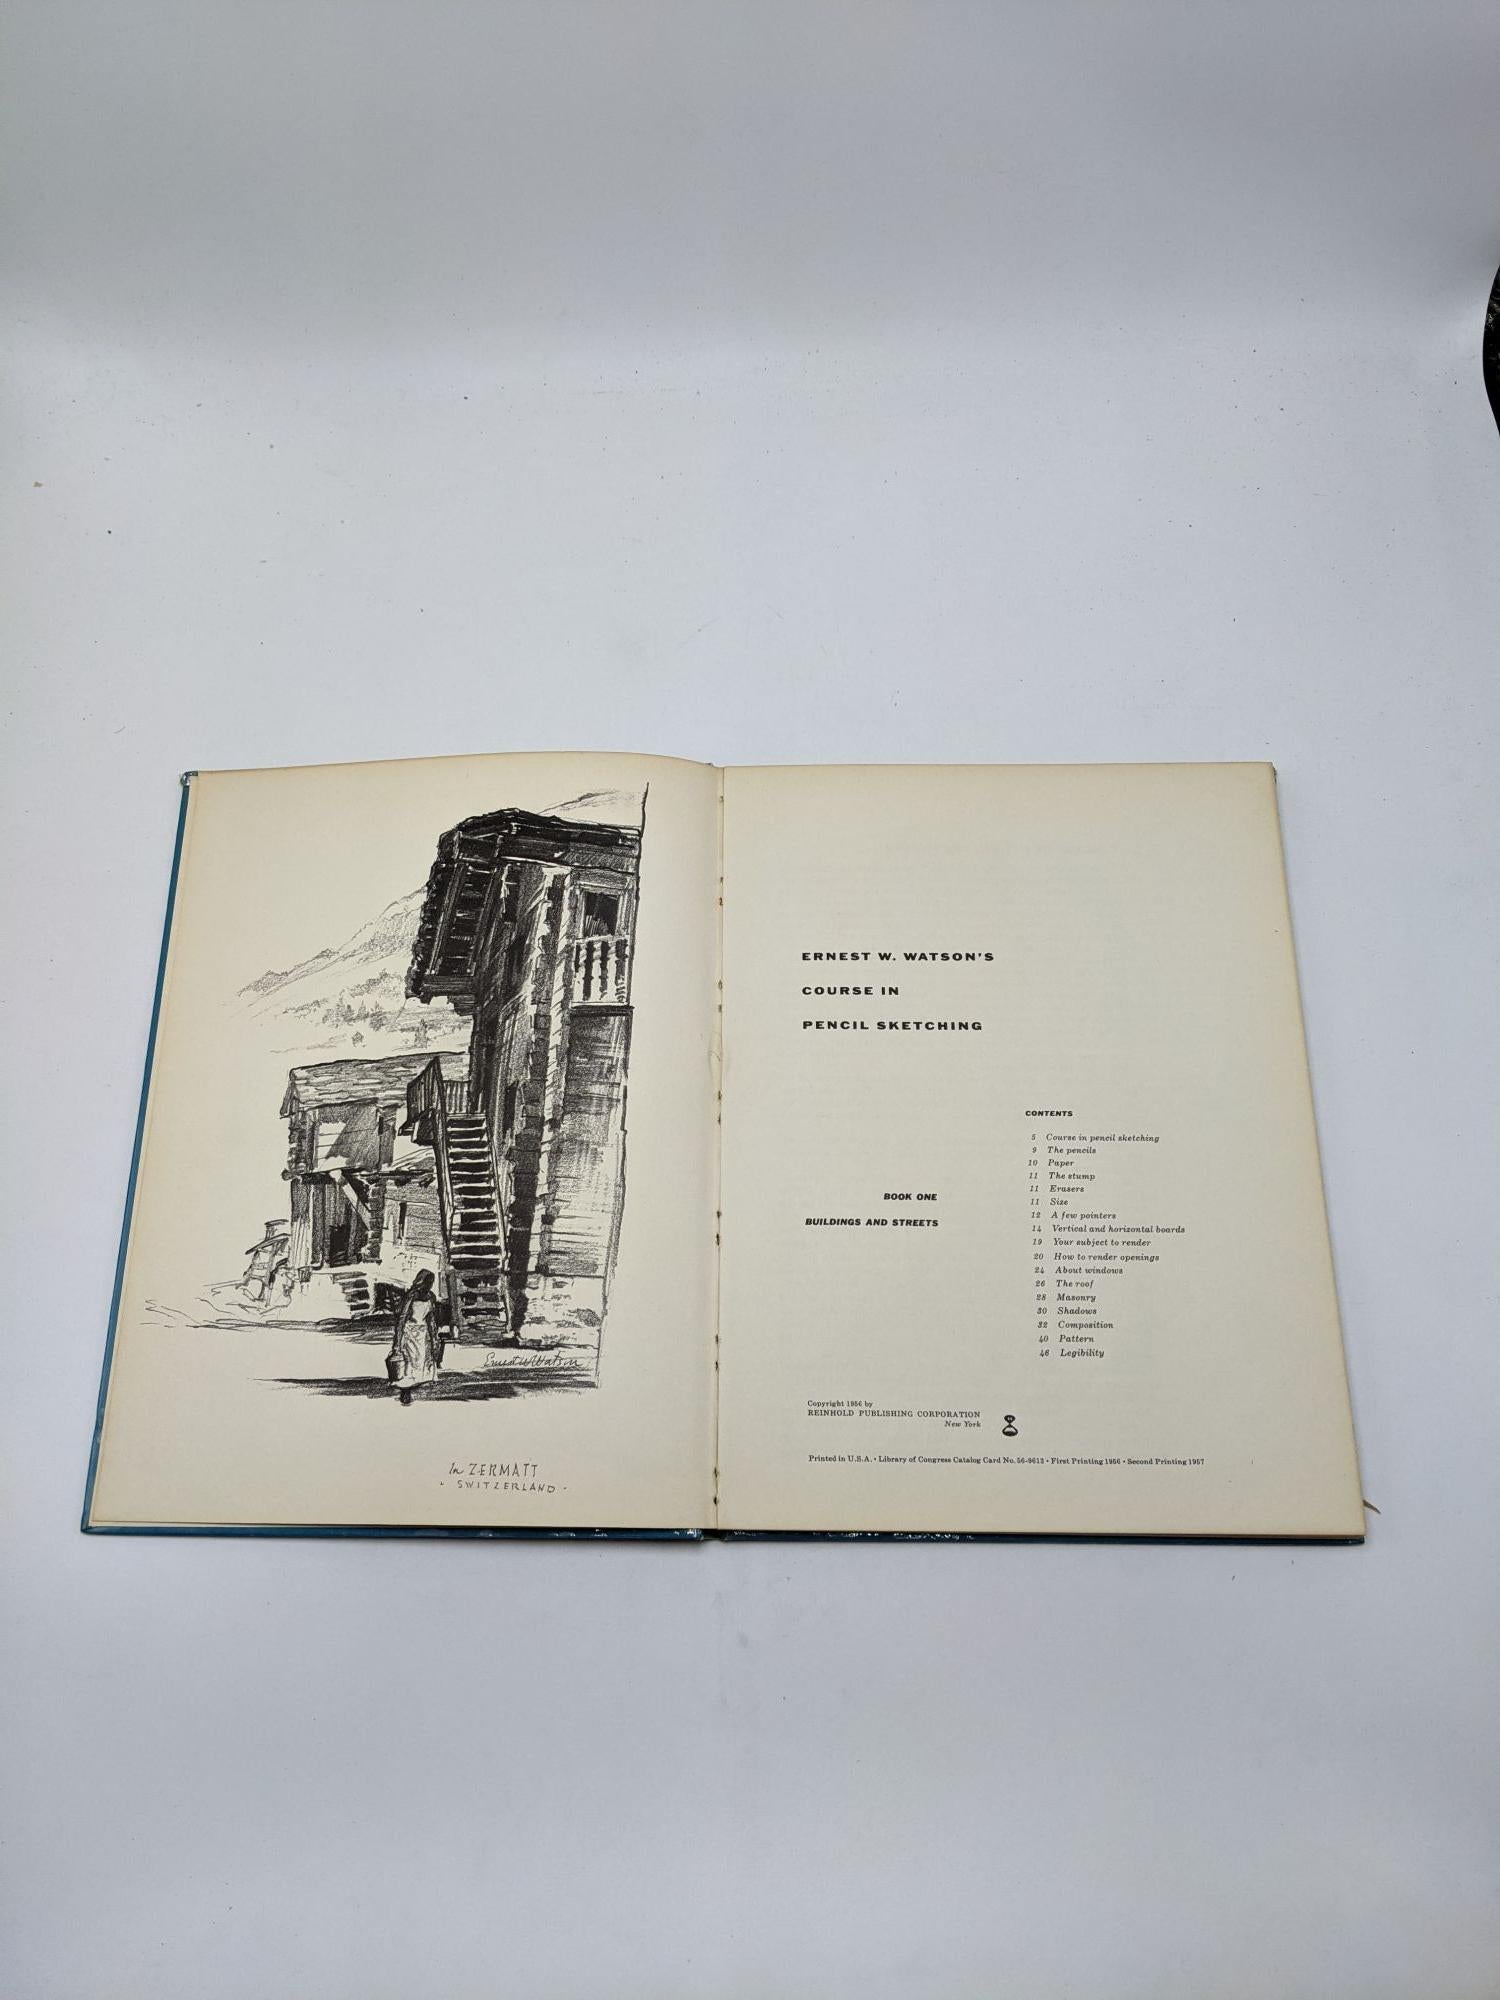 Course in Pencil Sketching, Book 1: Buildings And Streets by Ernest W.  Watson on Shadyside Books